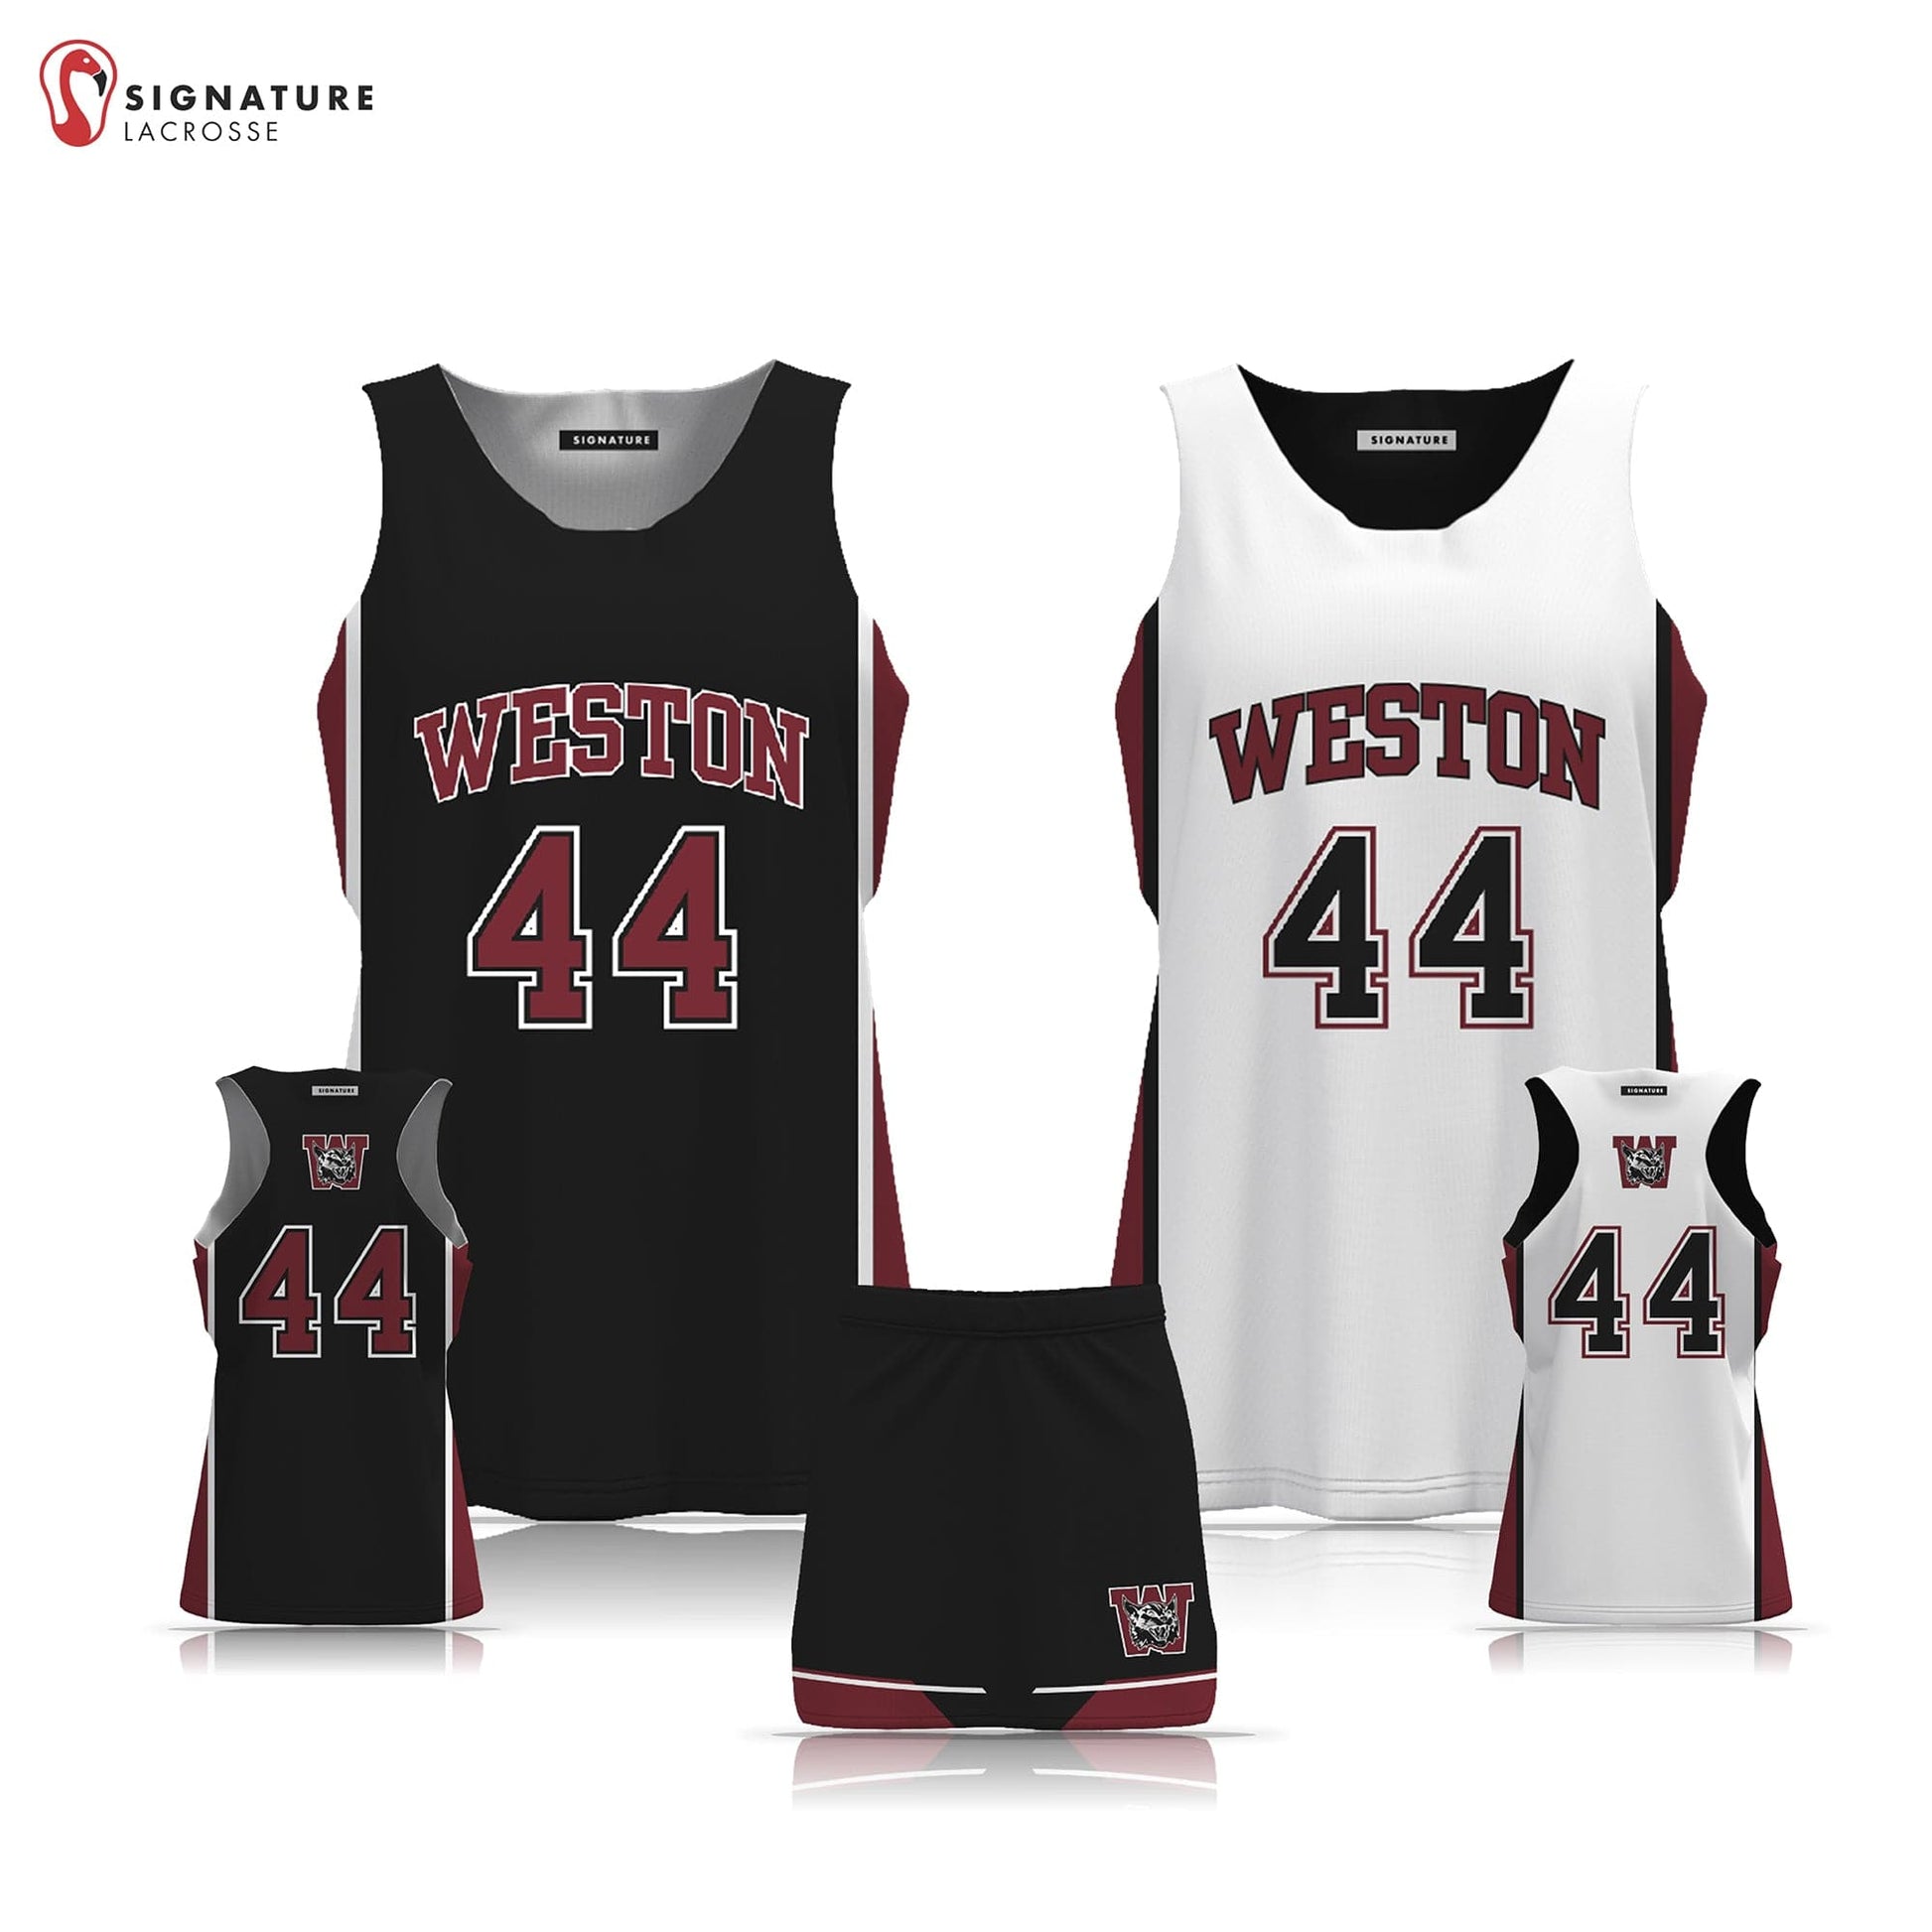 Weston Youth Lacrosse Women's 2 Piece Player Game Package: Grade 5-6 Signature Lacrosse